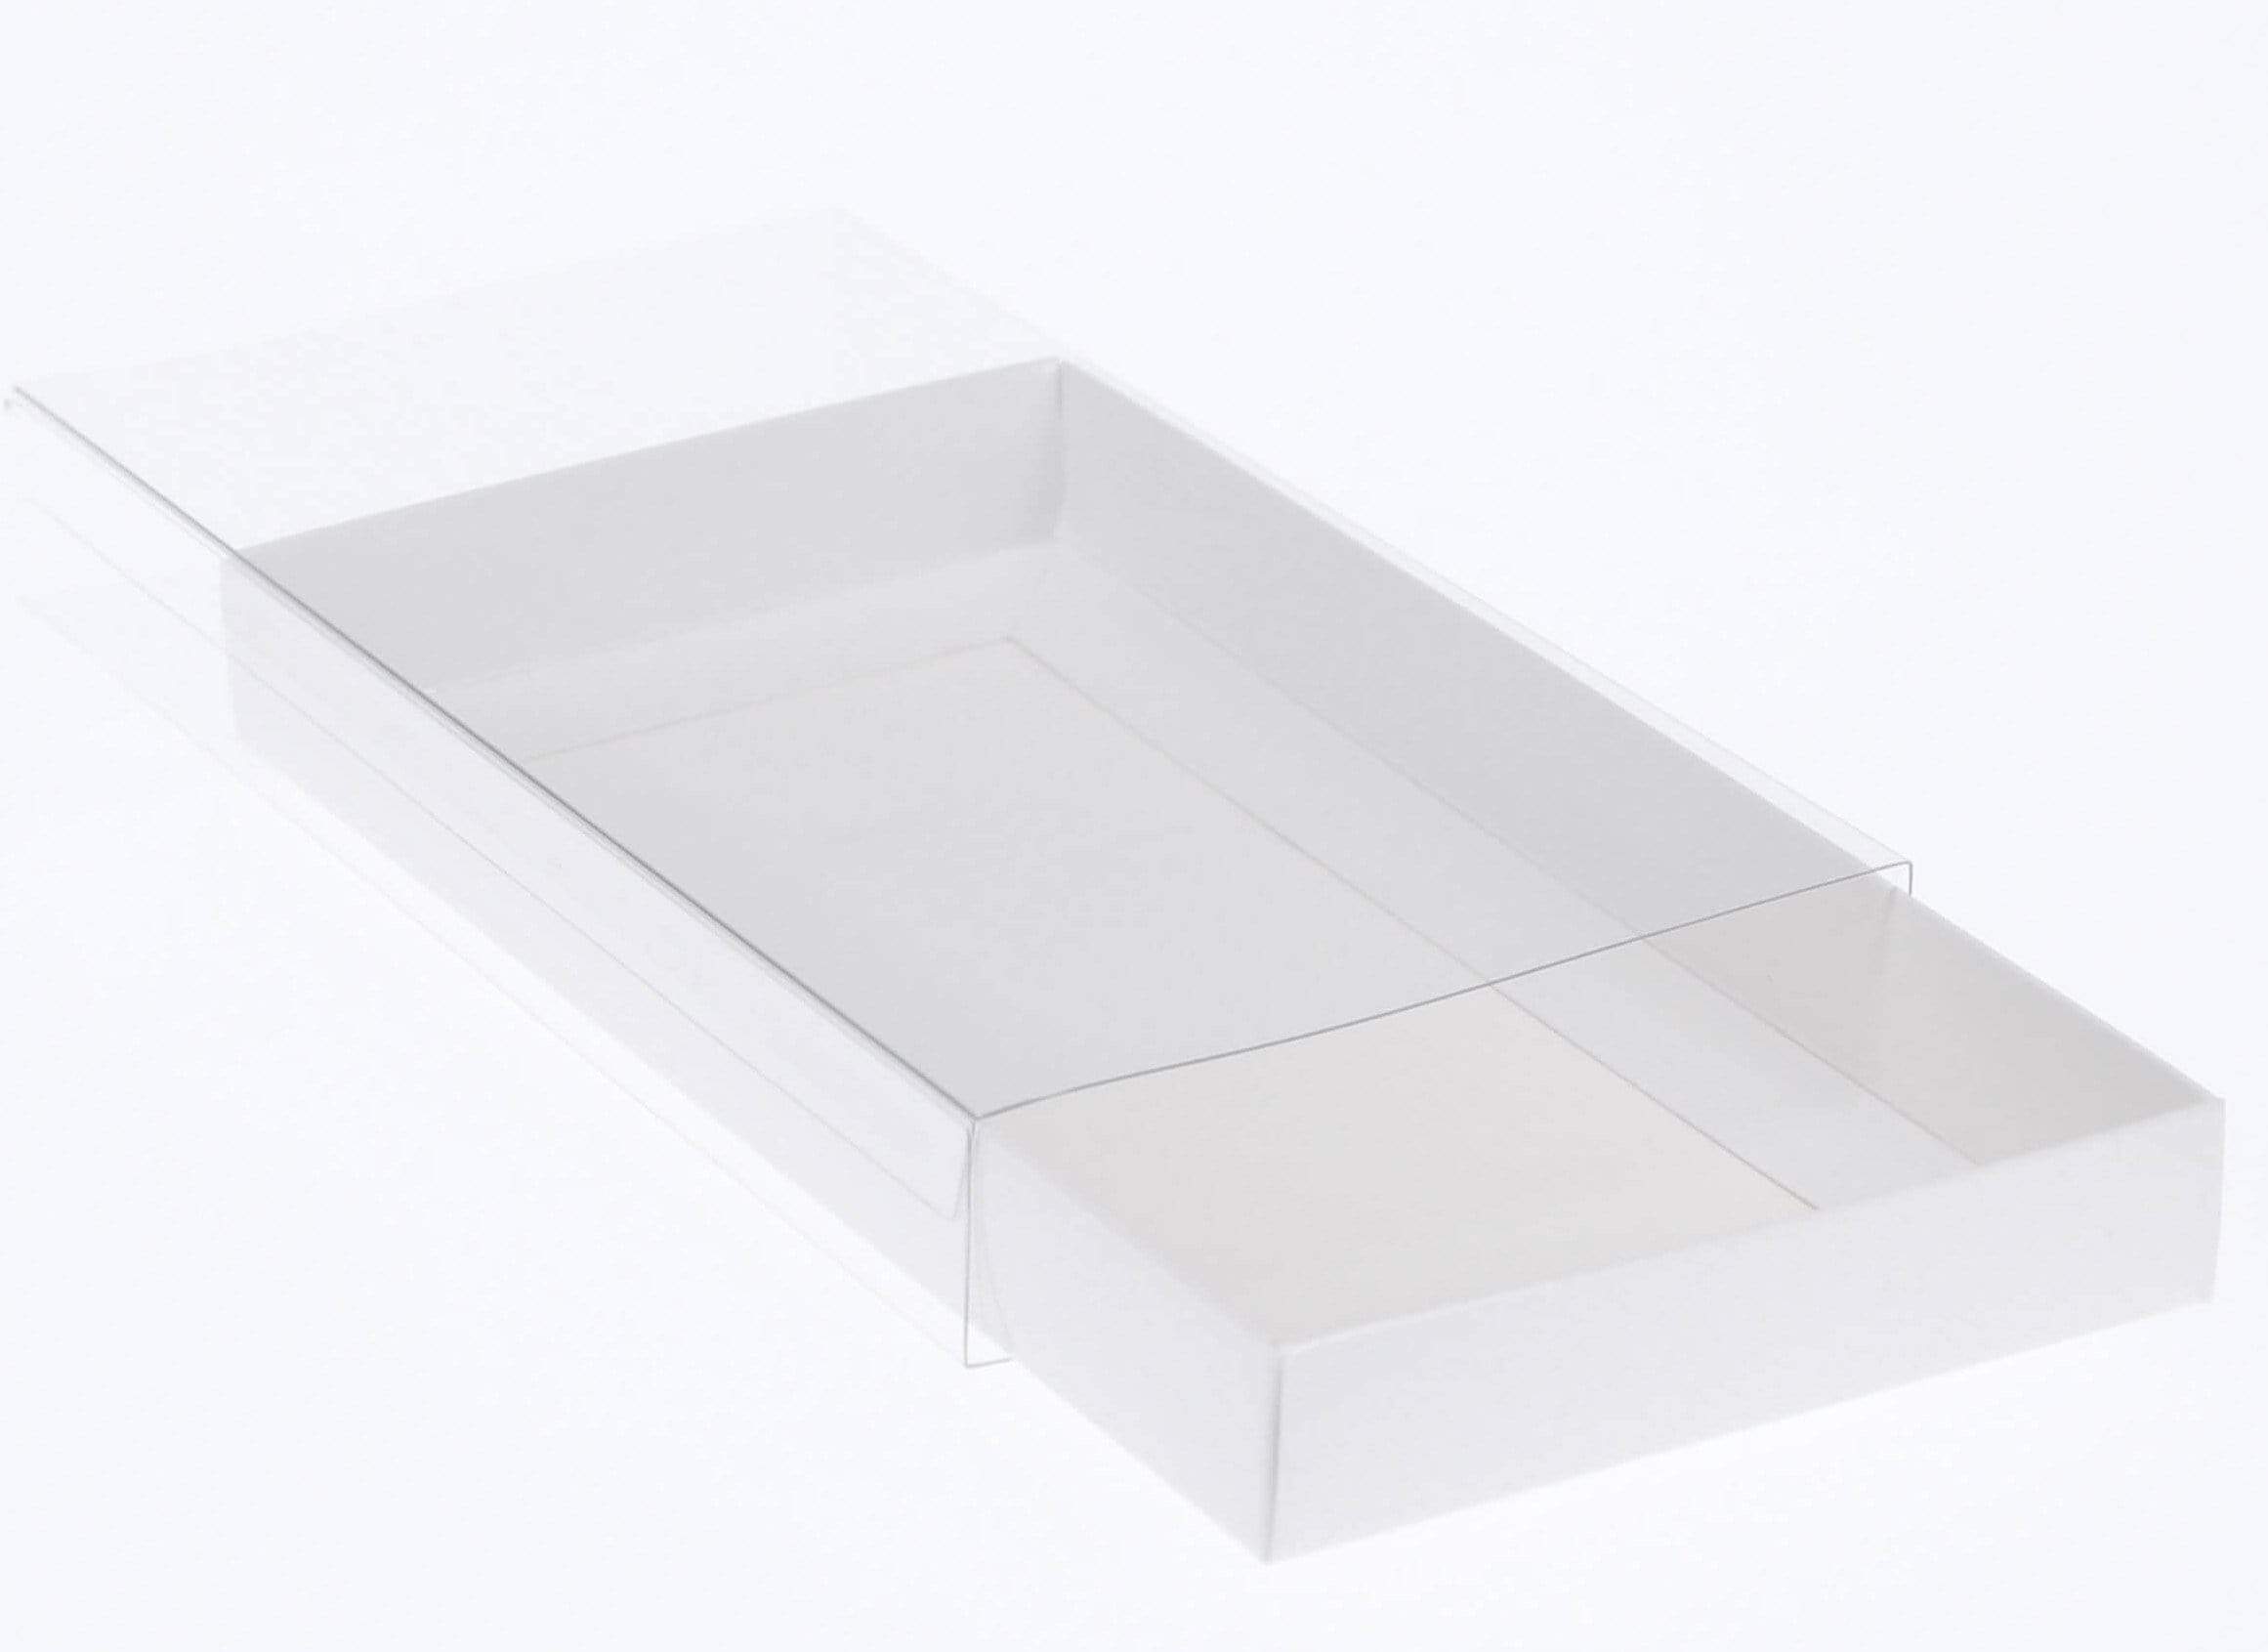 18 x 9 x 2cm Twin Cookie Dessert Box with Clear Slide Cover - Gloss White